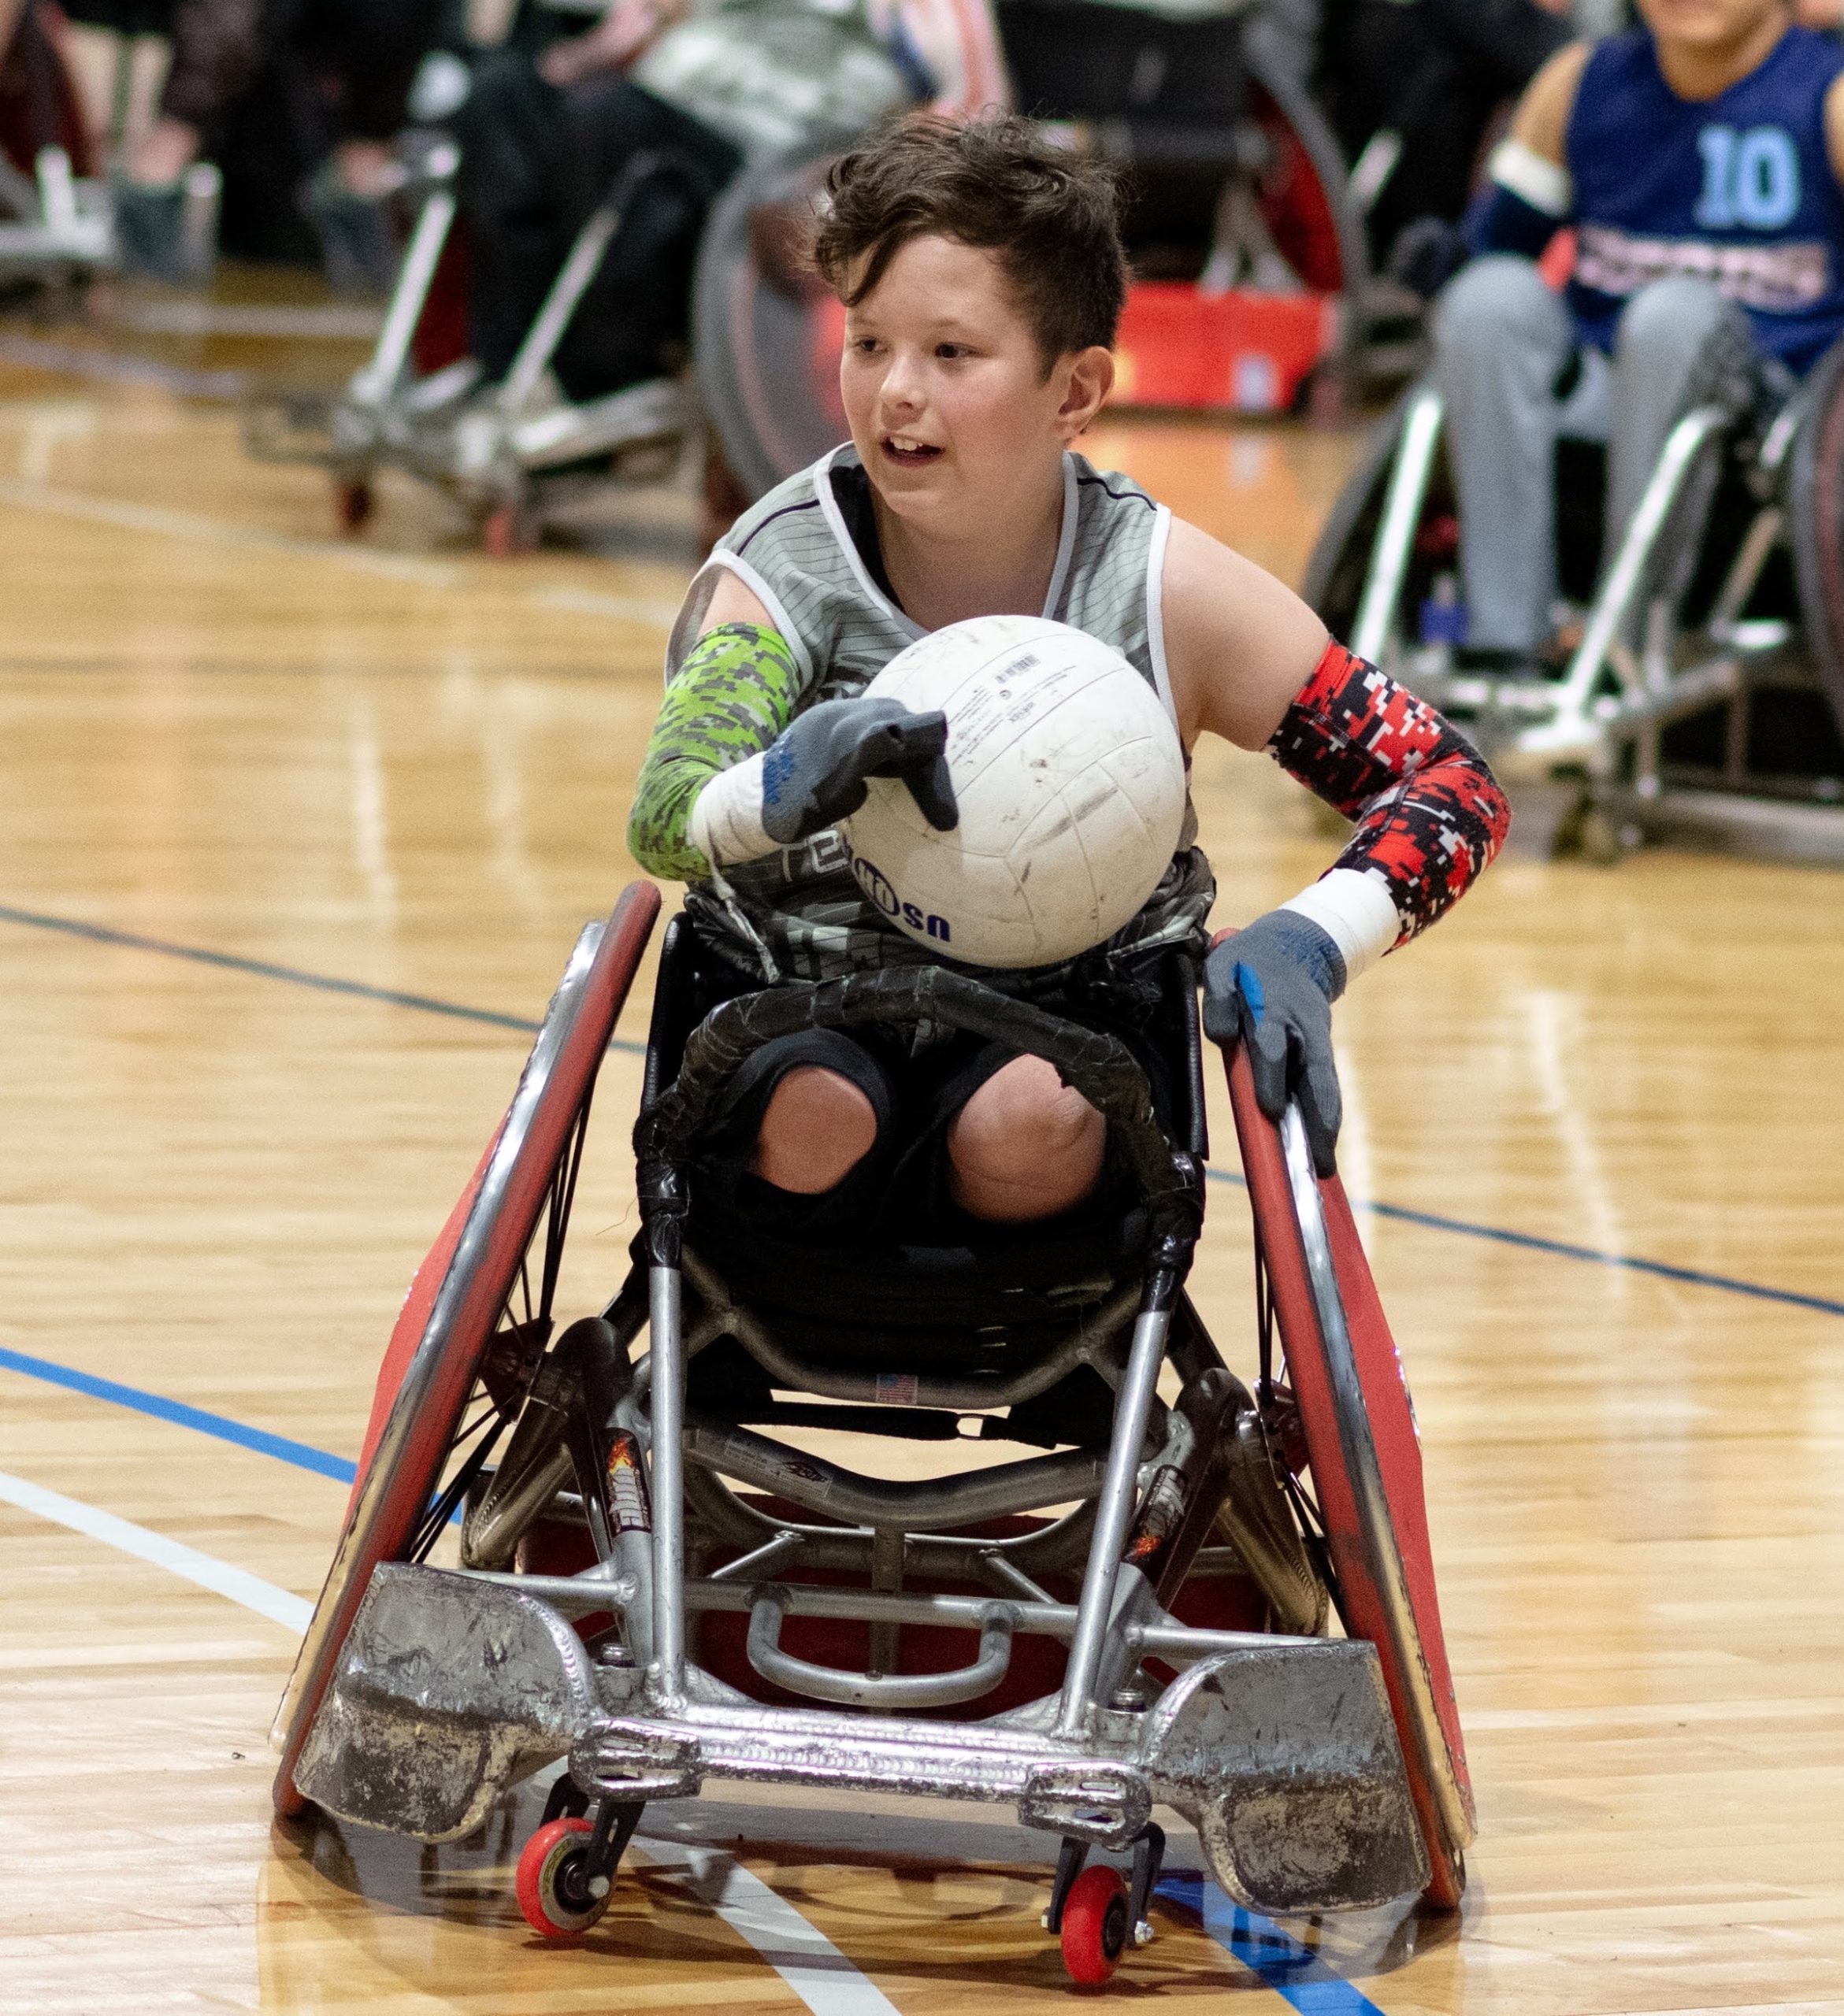 Male athlete in a wheelchair holding a volleyball